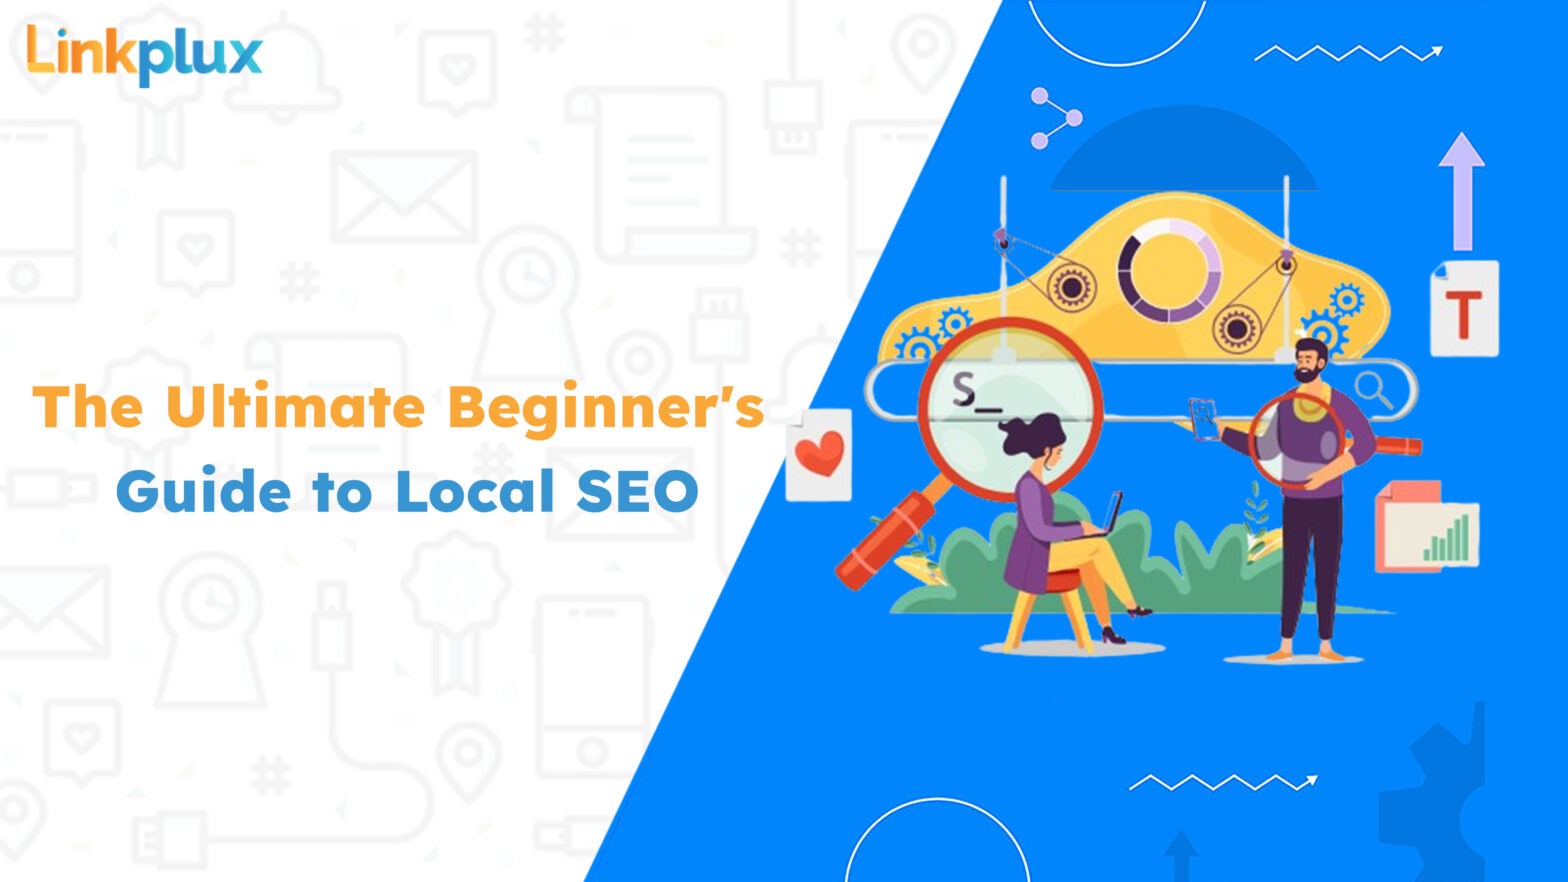 The ultimate guide to local SEO